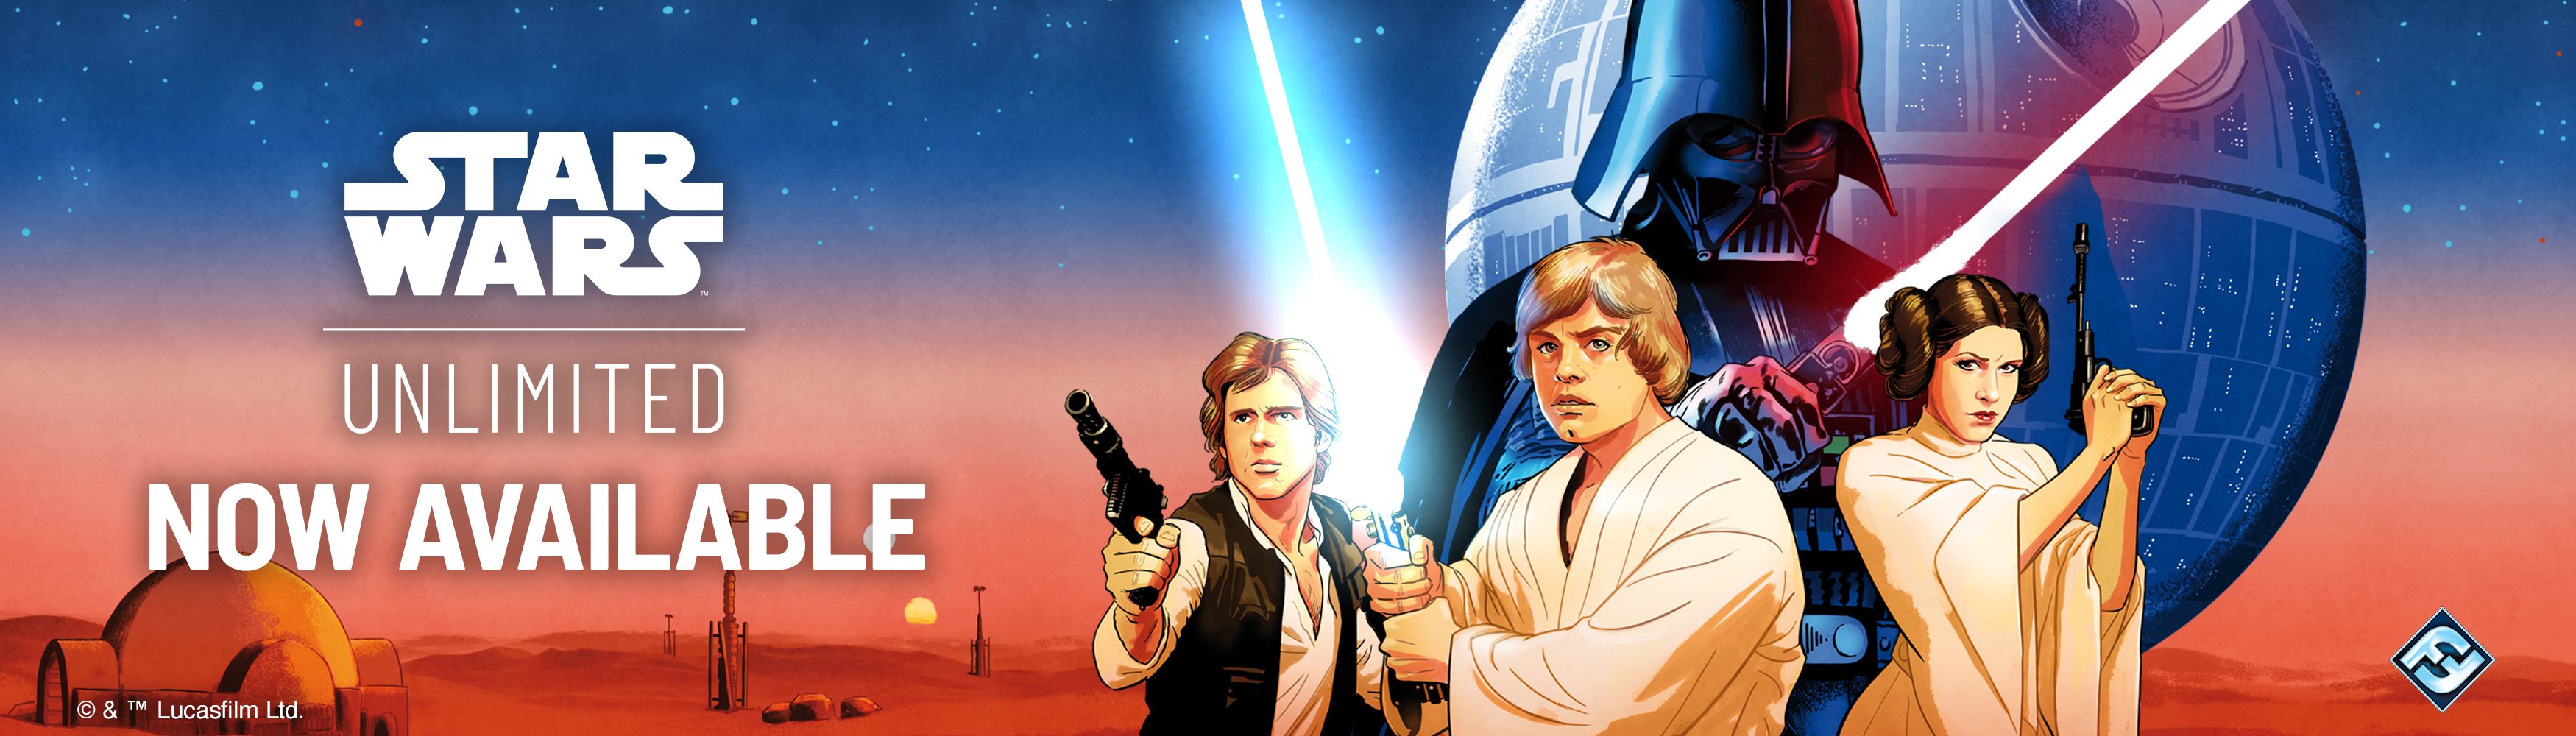 Star Wars: Unlimited! - Available Now!